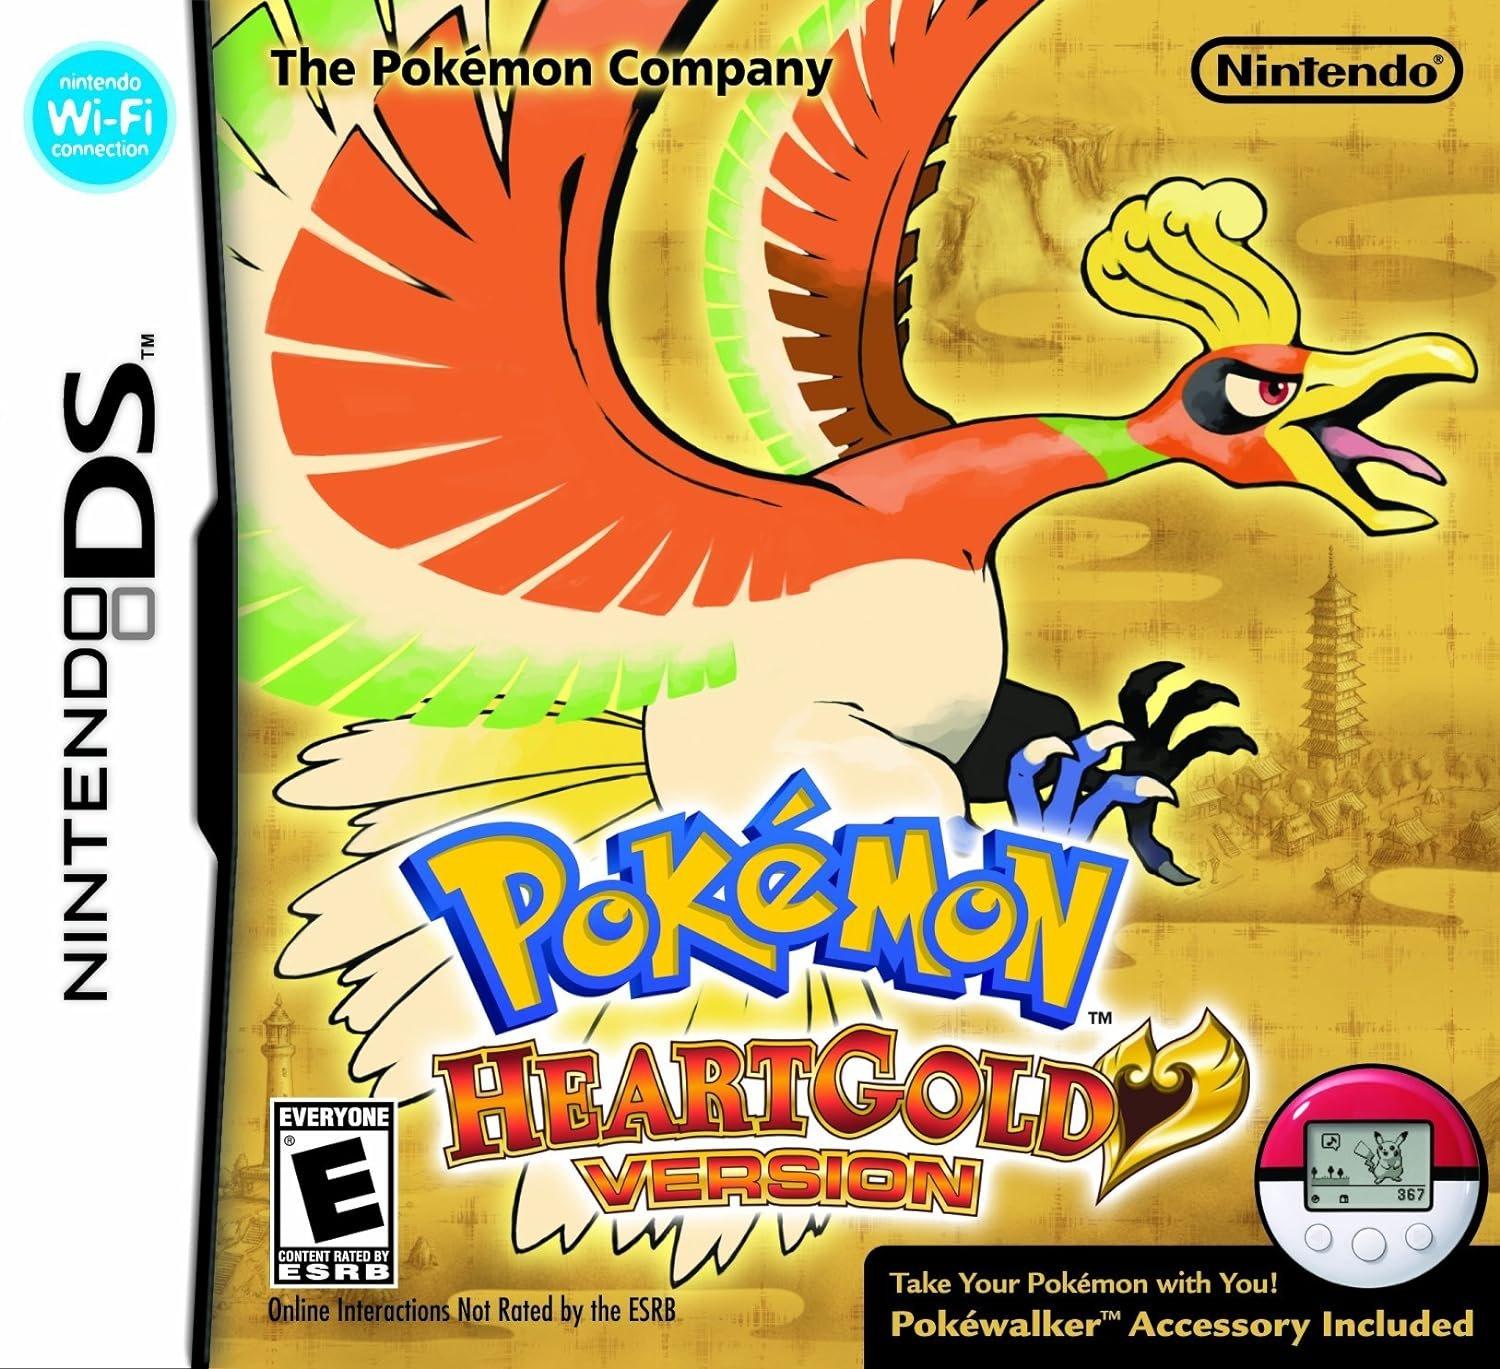 pokemon trading card game nds